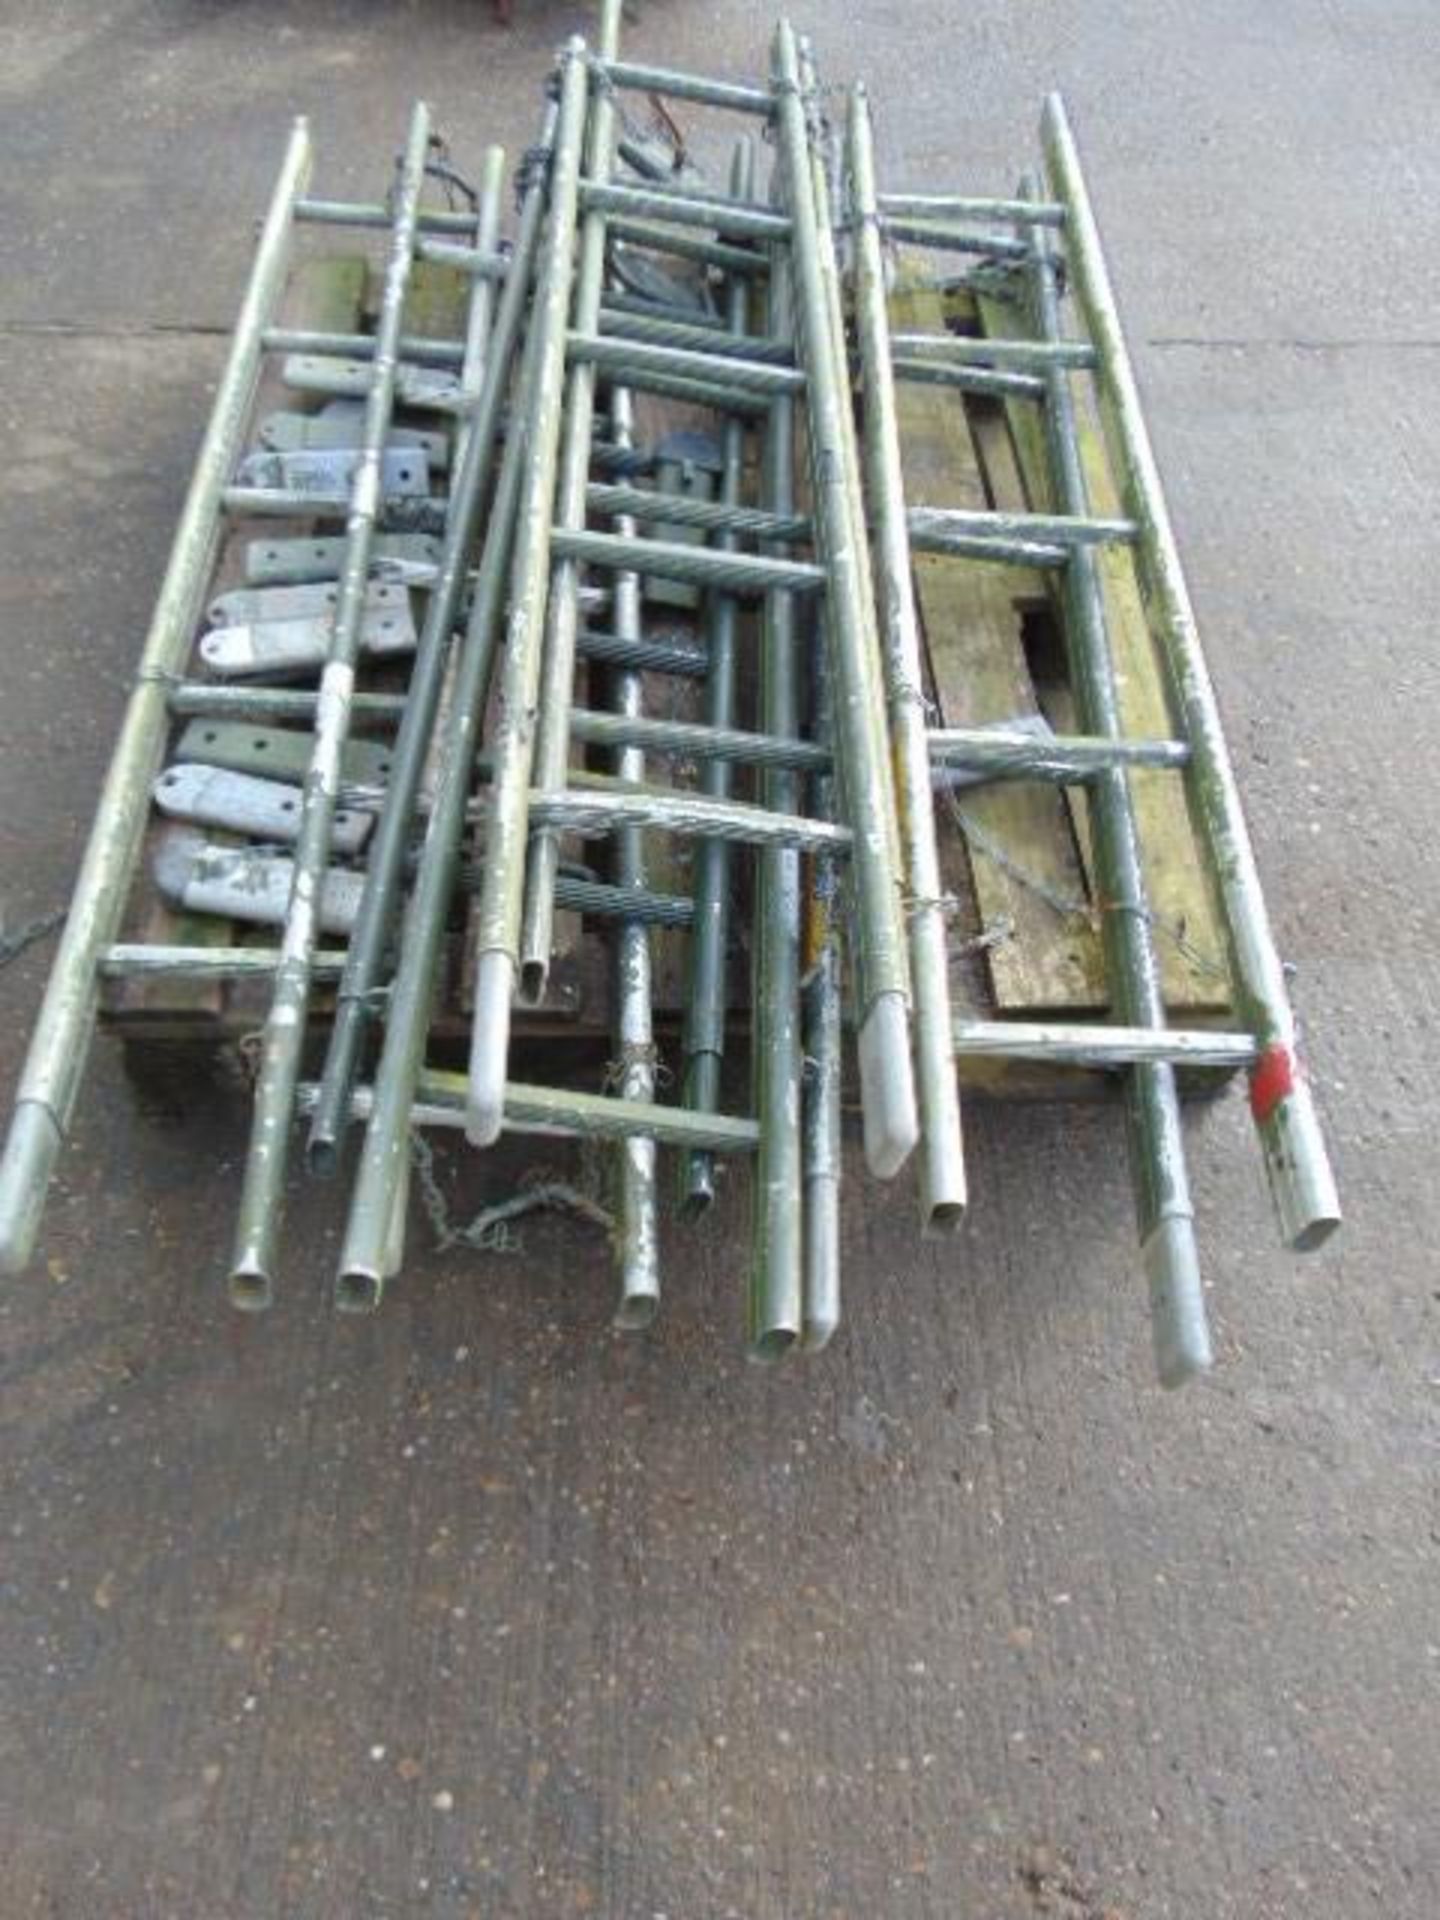 3 Pallets of Various Military Aluminium Scaling/Assault Ladder Sections - Image 5 of 10